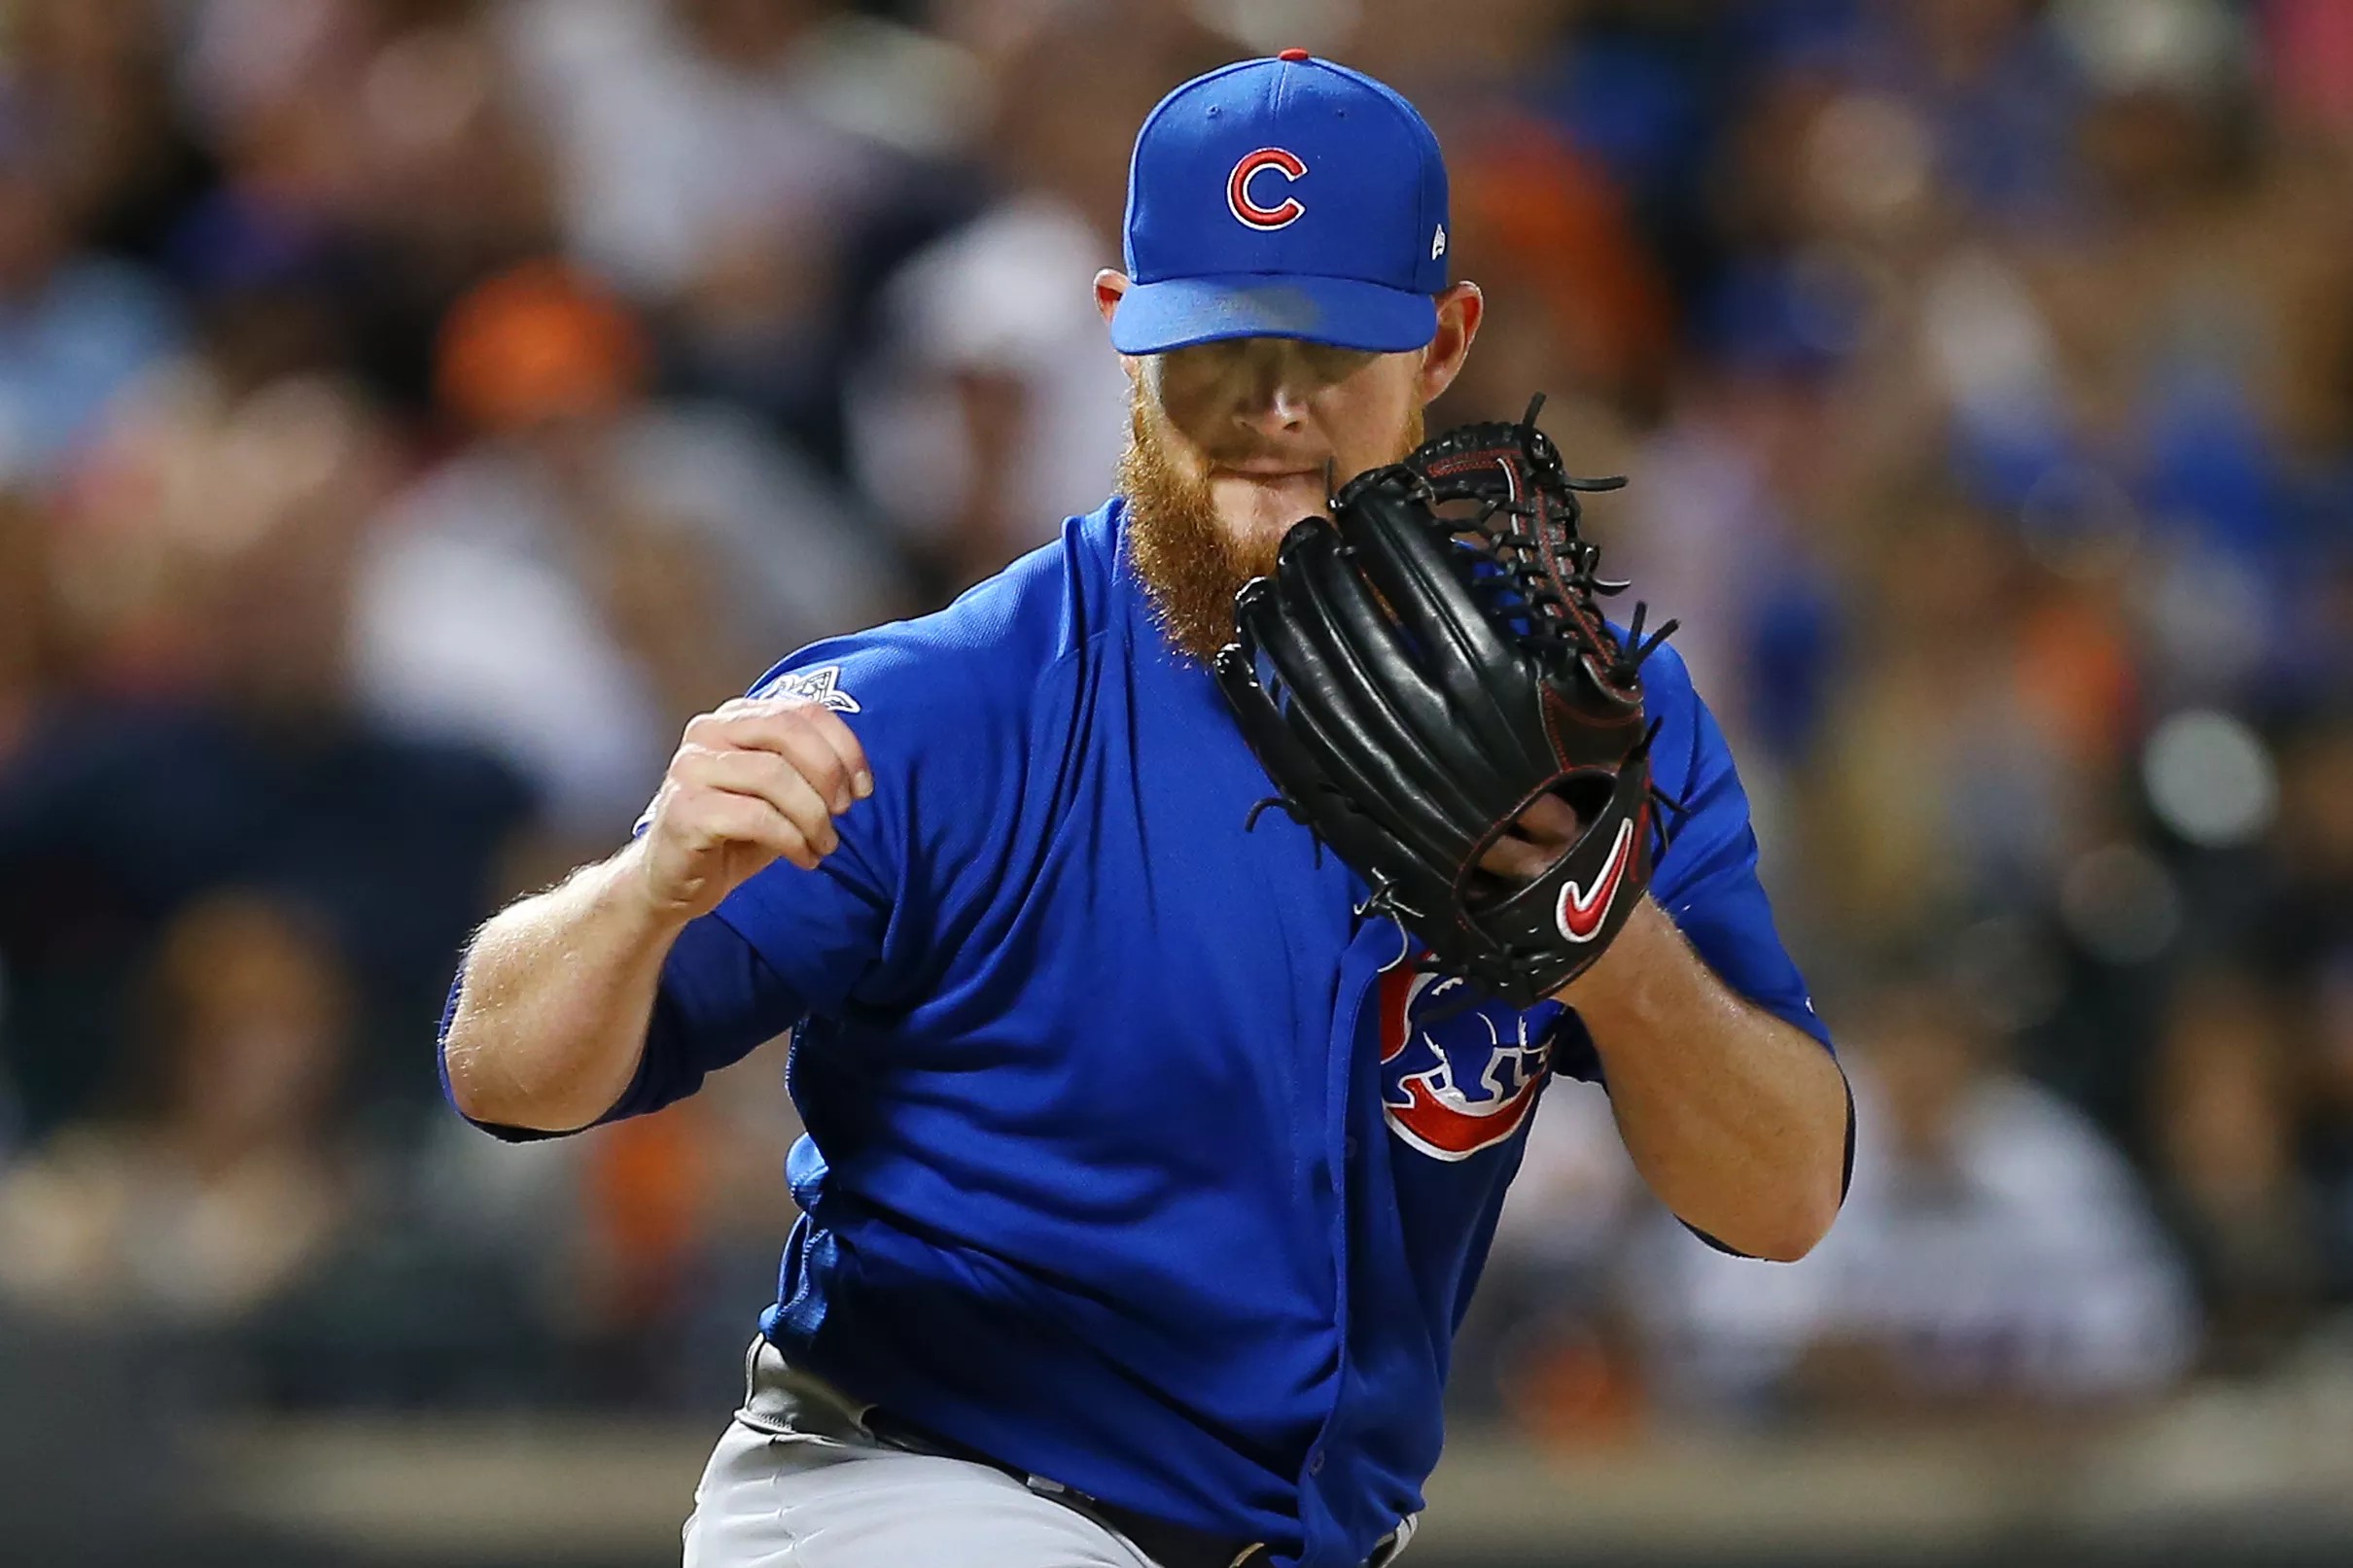 Cubs closer Craig Kimbrel appears on brink of return from IL after